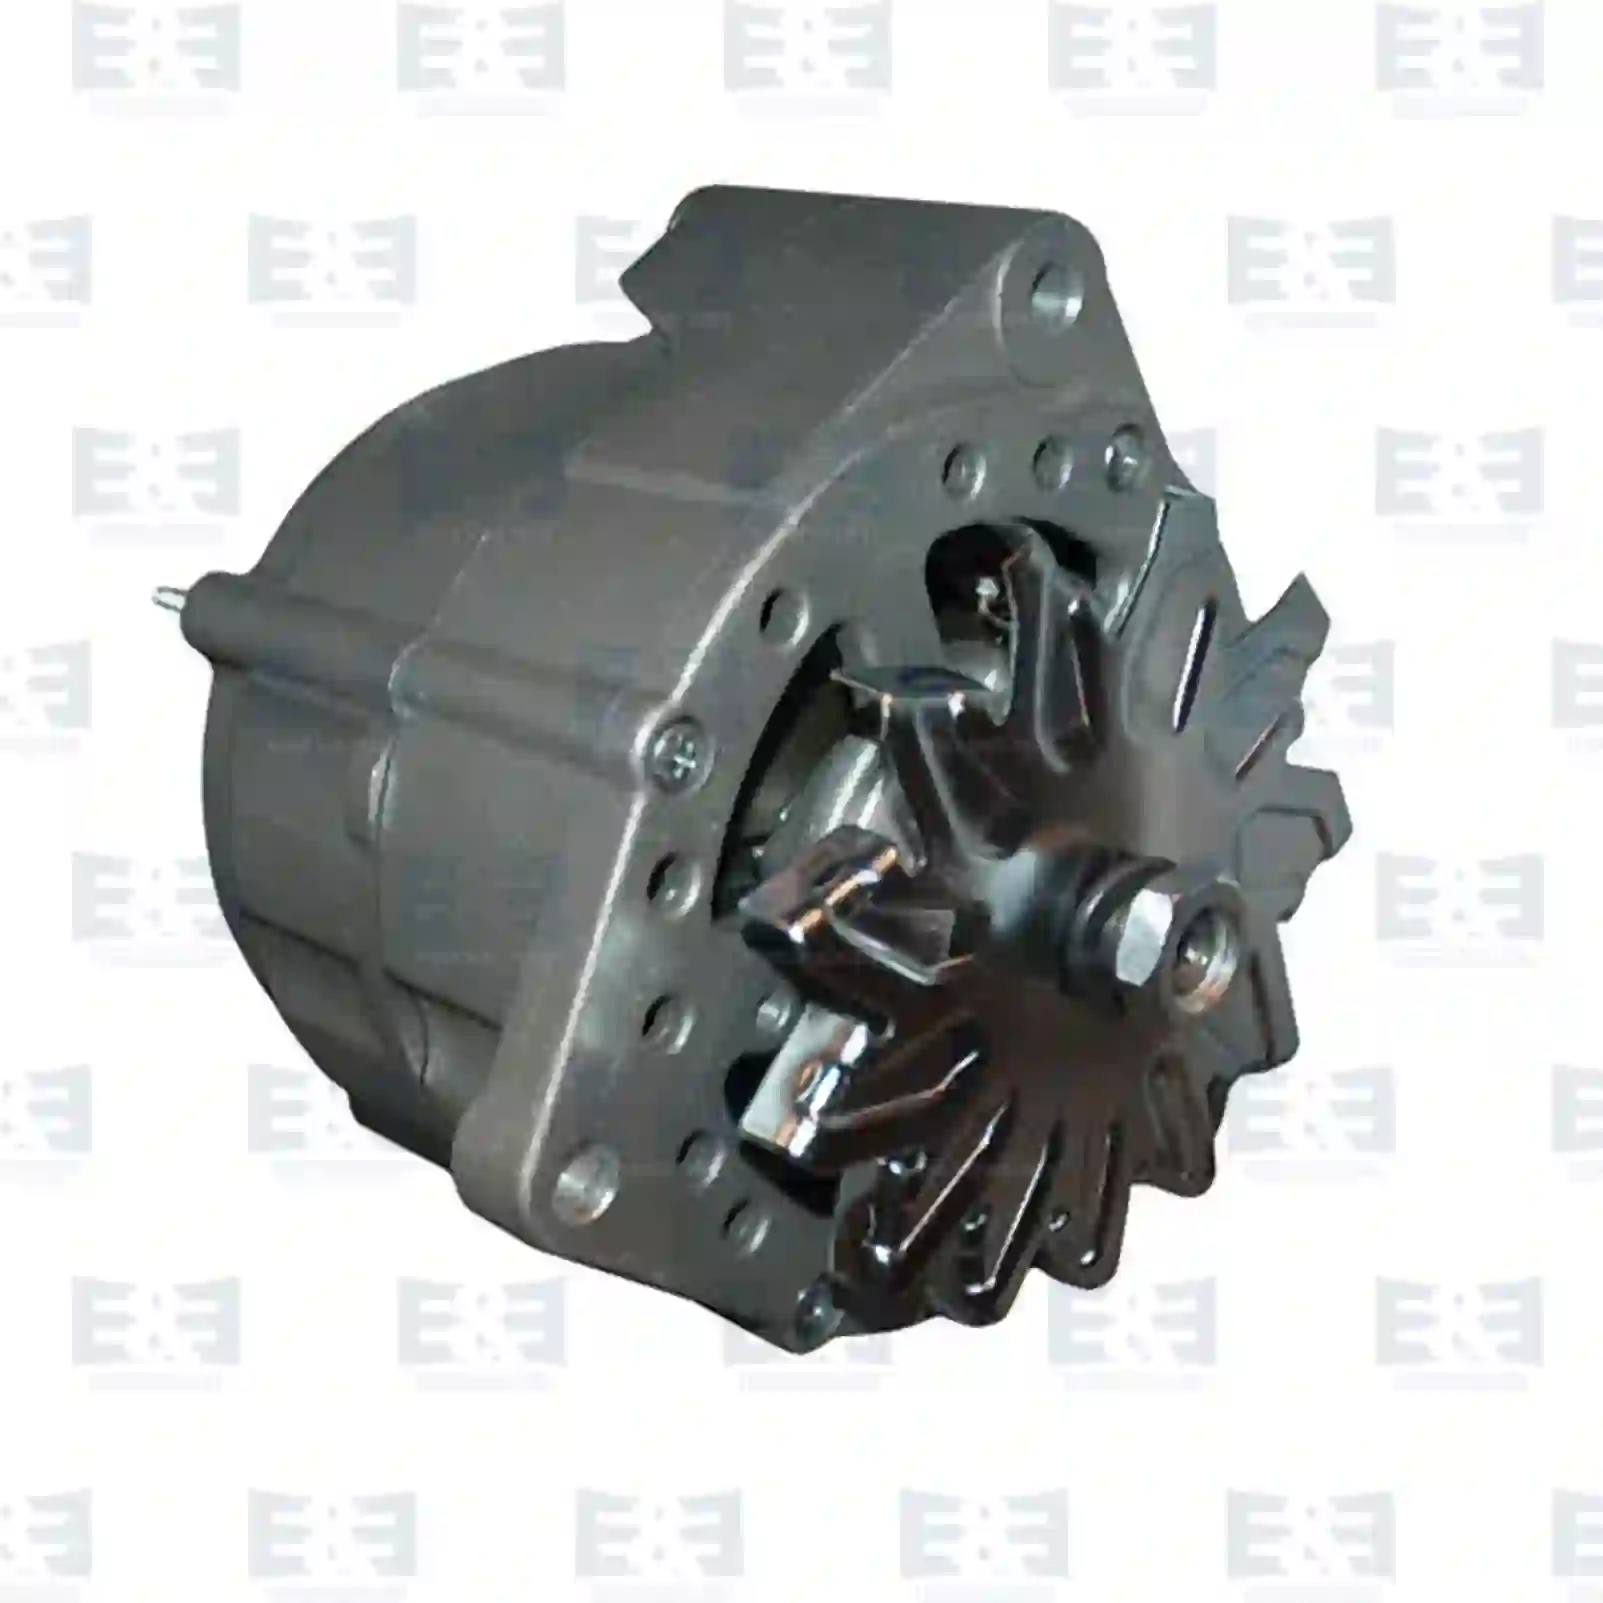 Alternator Alternator, without pulley, EE No 2E2290000 ,  oem no:9019635901, 3255439, 0613097, 0854300, 0890775, 0894300, 1244492, 1244492A, 1244492R, 1274480, 1350515, 1350515A, 1350515R, 1357591, 1357591A, 1357591R, 1357592, 1516560, 1528595, 613097, 613097A, 613097R, 854300, 859232, 890775, 894300, AELD077, AMPC197, 01171461, 03040718, 1702103, 1702113, 9540702, 6002025, 6104058, 51261017119, 51261017123, 51261017144, 51261017184, 51261017185, 51261017201, 51261019123, 51261019144, 51261019185, 51261019201, 51262017185, 51262017201, 81261016018, 81261016027, 88261016001, 51261017201, 0051543402, 0061546802, 0071542702, 0091540702, 009154070280, 009154070287, 0101542002, 3661500750, 3661502050, 3761507050, 0101542002, 7421324000, 7421341000, 7421353000, 894300, ZG20247-0008 E&E Truck Spare Parts | Truck Spare Parts, Auotomotive Spare Parts